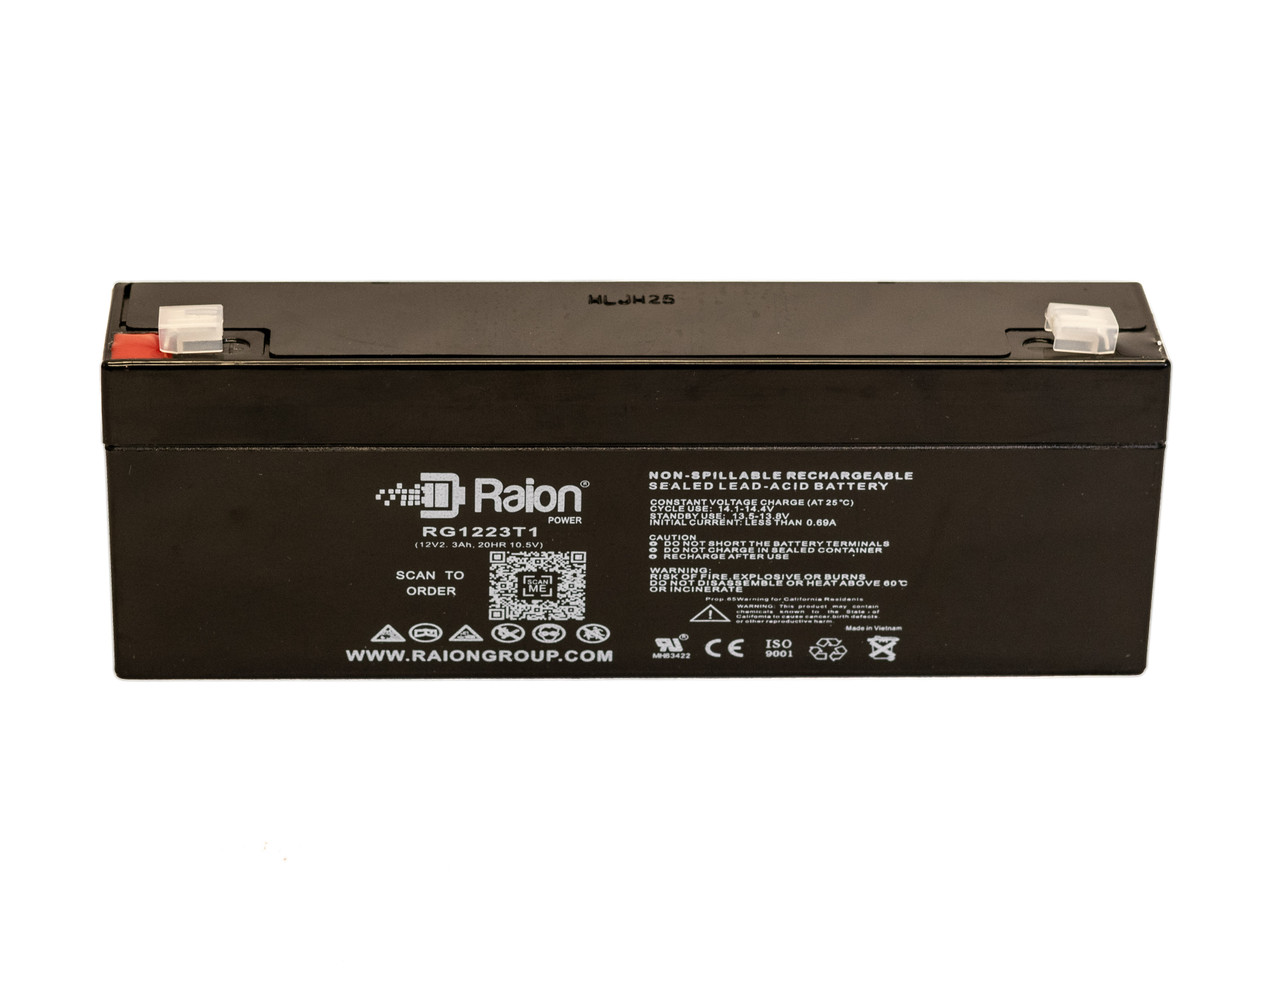 Raion Power 12V 2.3Ah SLA Battery With T1 Terminals For Life Science LS285 Defibrillator